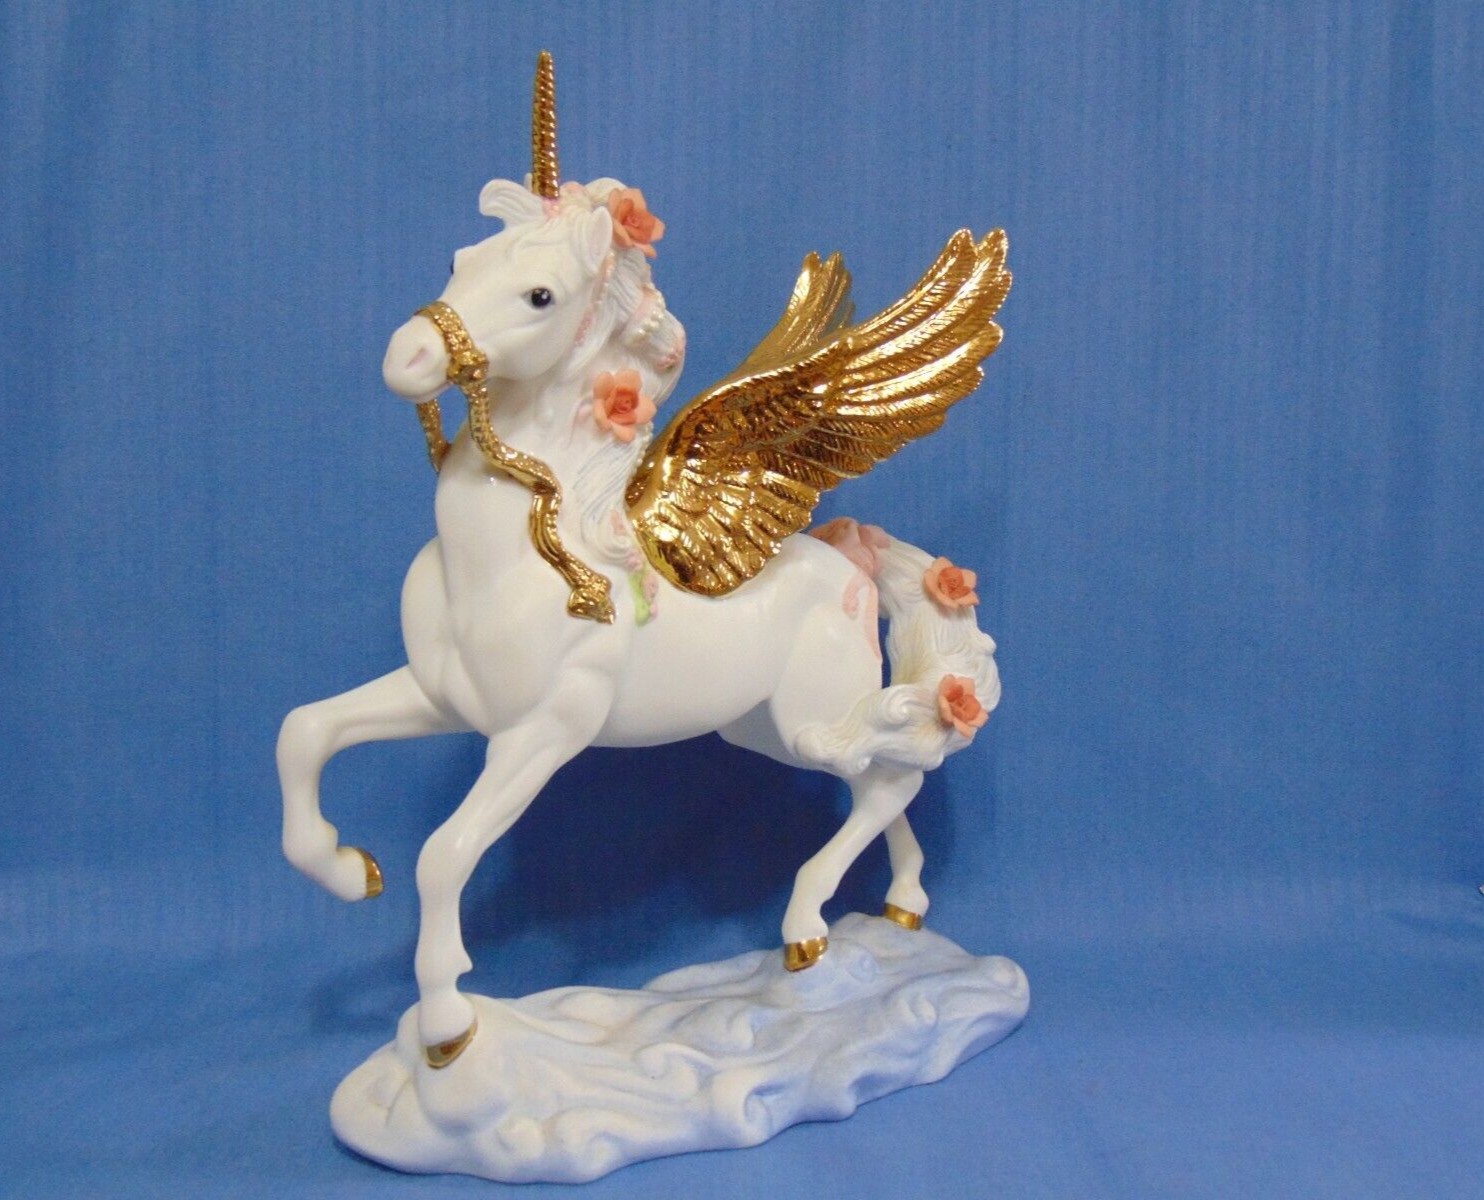 Limited Edition Princeton Gallery Unicorn Sculpture A Majestic Collection Piece